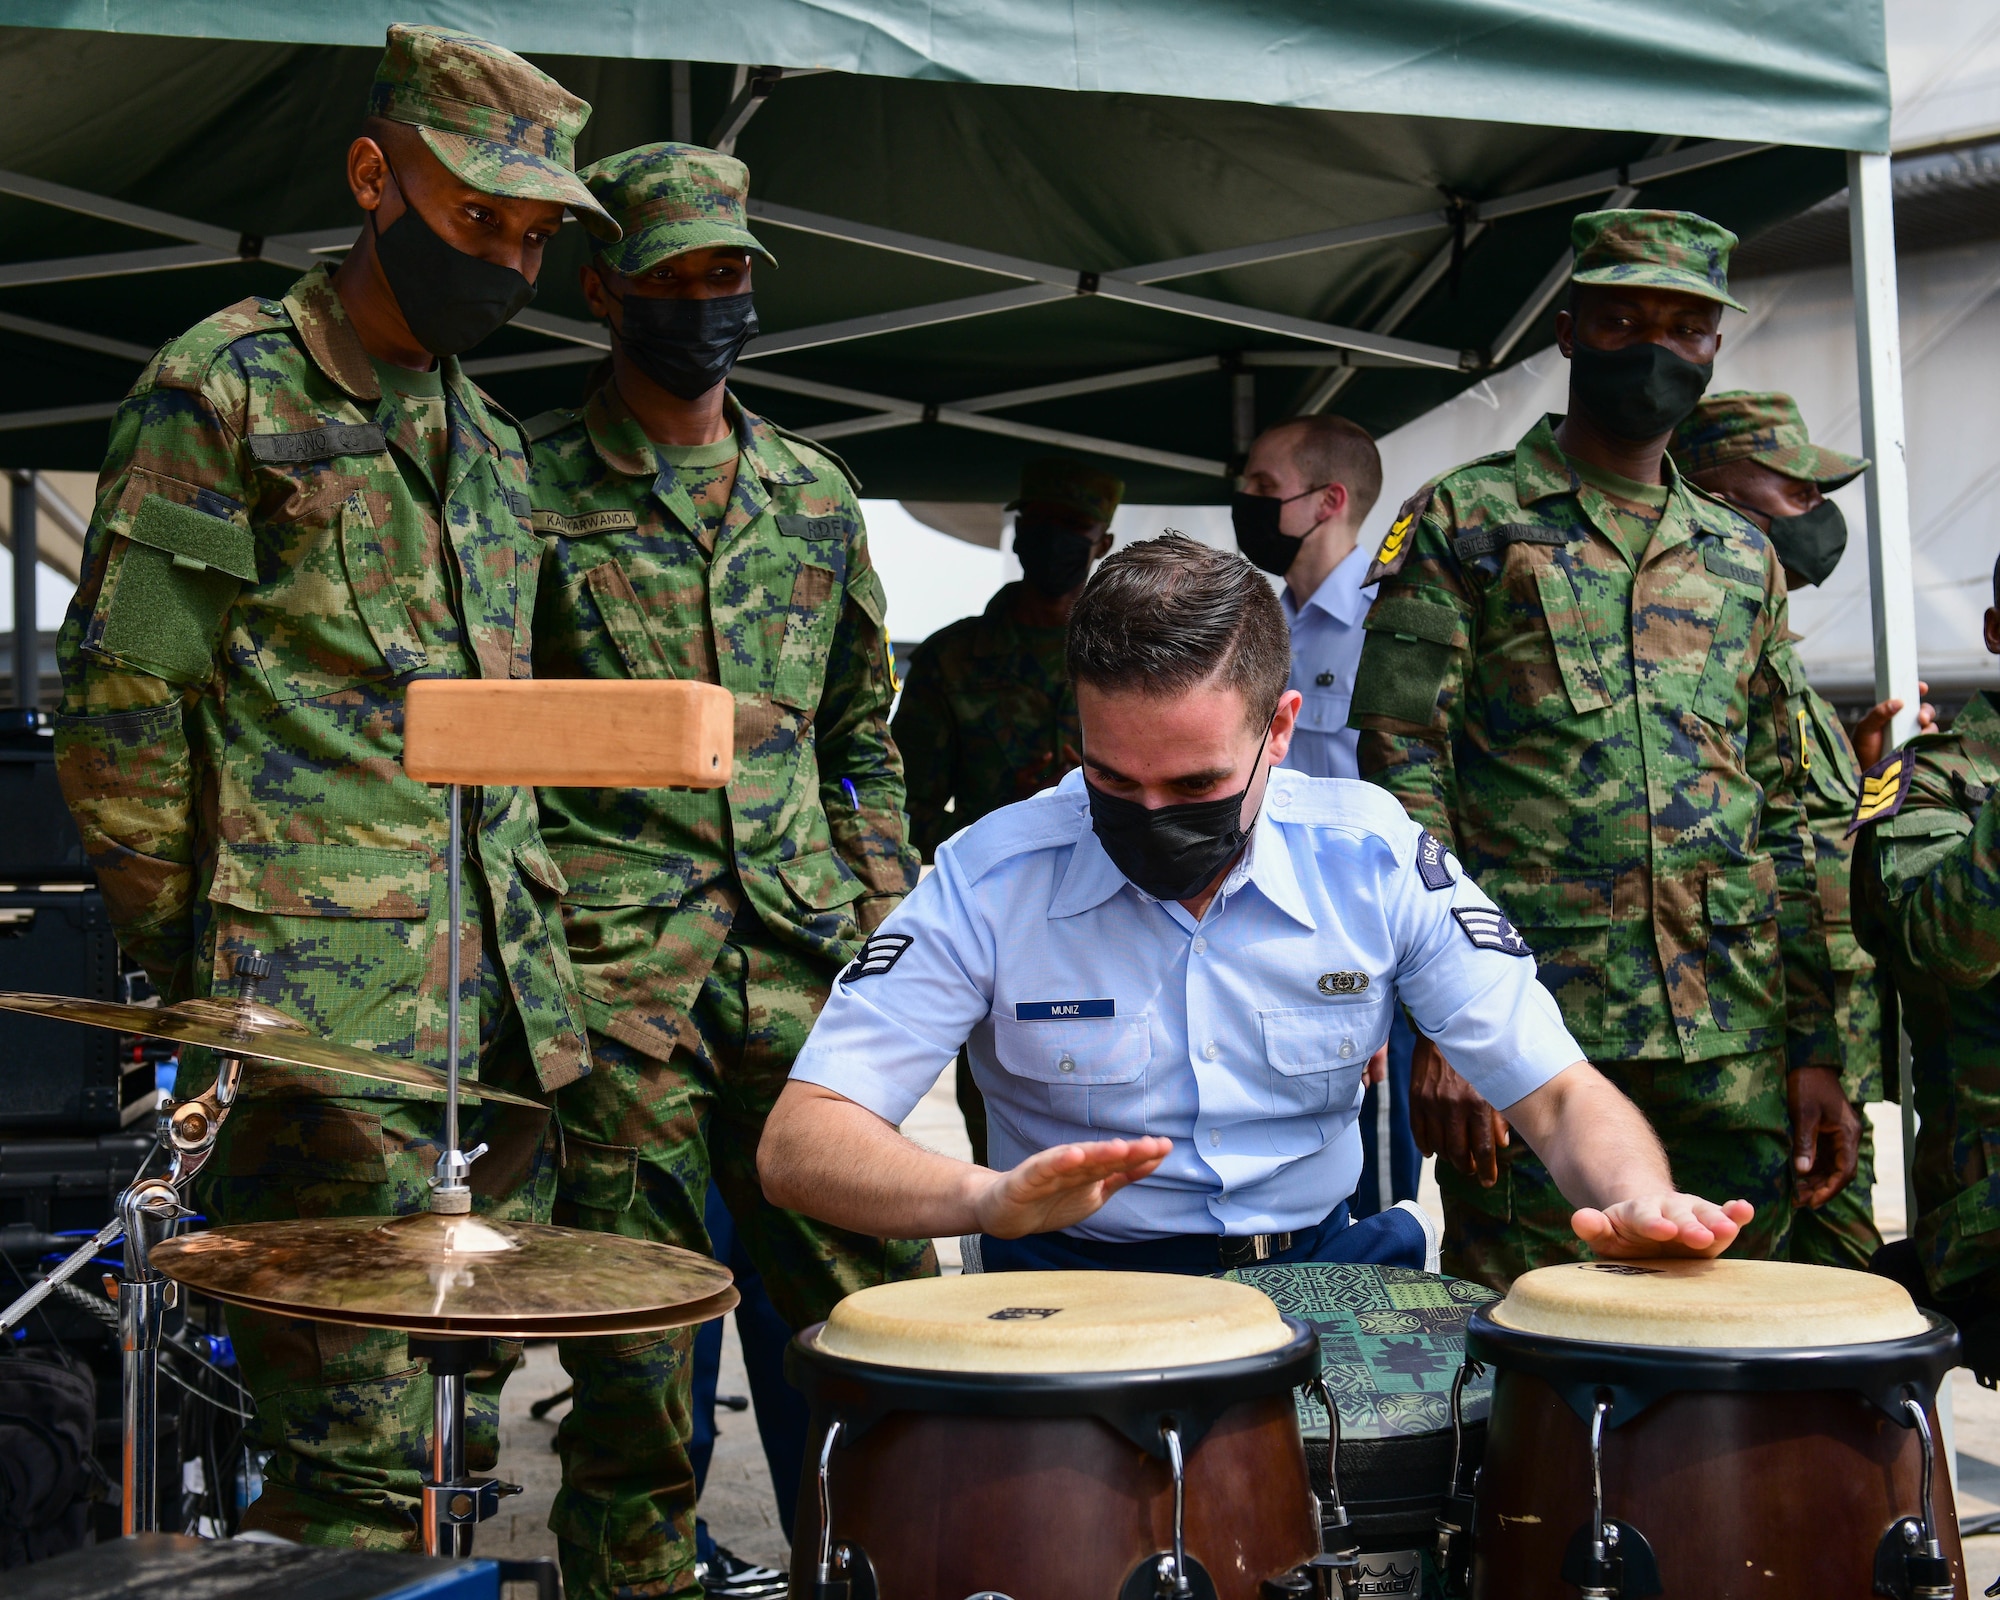 U.S. Air Force Senior Airman Luis Minuz-Marti, U.S. Air Forces in Europe Band pianist and percussionist, practices with members of the Rwanda Defence Force Band during a rehearsal for the 202 African Air Chief Symposium in Kigali, Rwanda, Jan. 21, 2022. The USAFE Band is visiting Rwanda to present several virtual educational events and concerts. The USAFE band’s performances bolster international partnership and support African ties. (U.S. Air Force photo by Brooke Moeder)